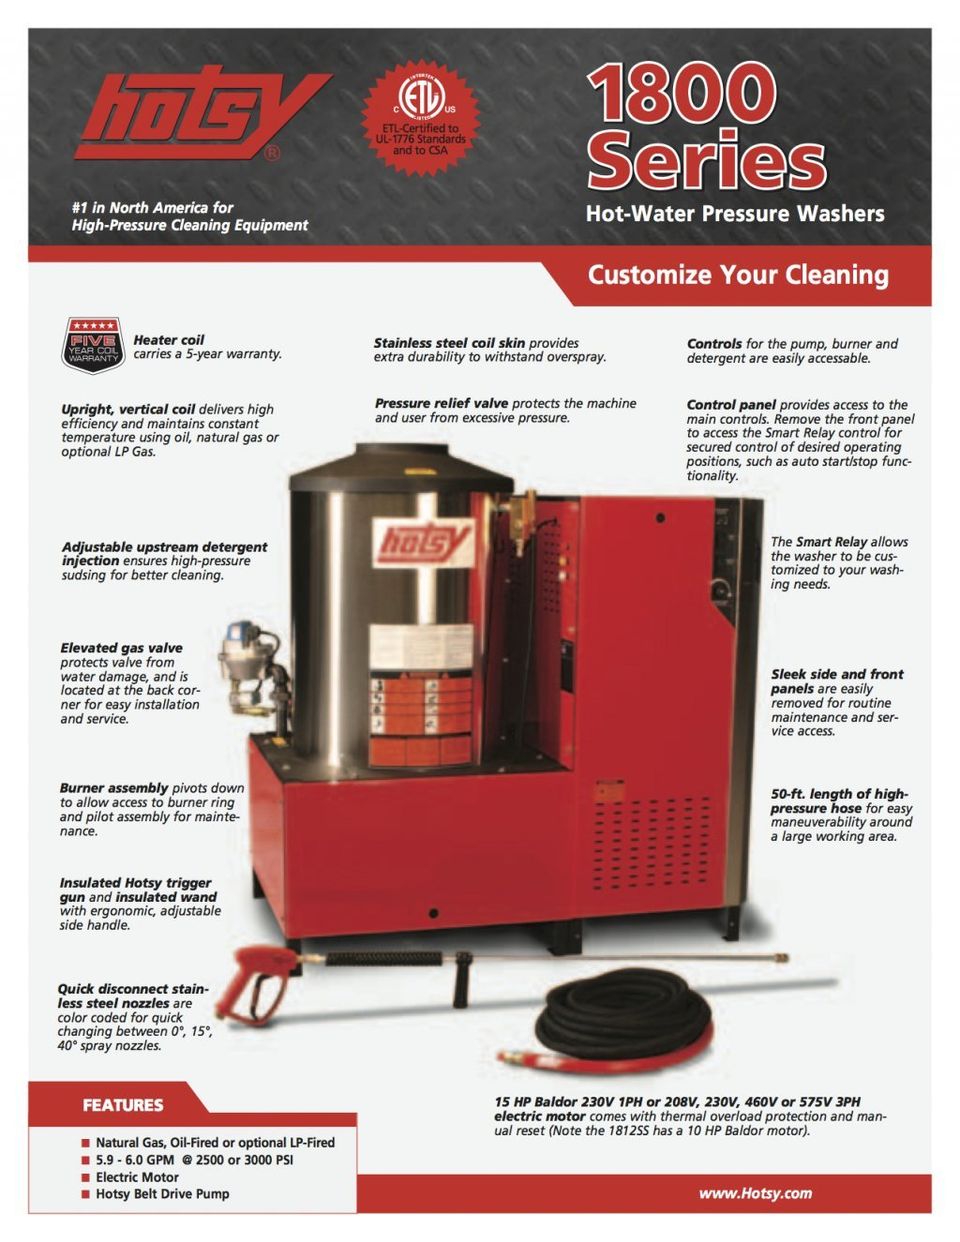 Hotsy Hot Water Pressure Washer 1800 Series Product Sheet -- Page 1